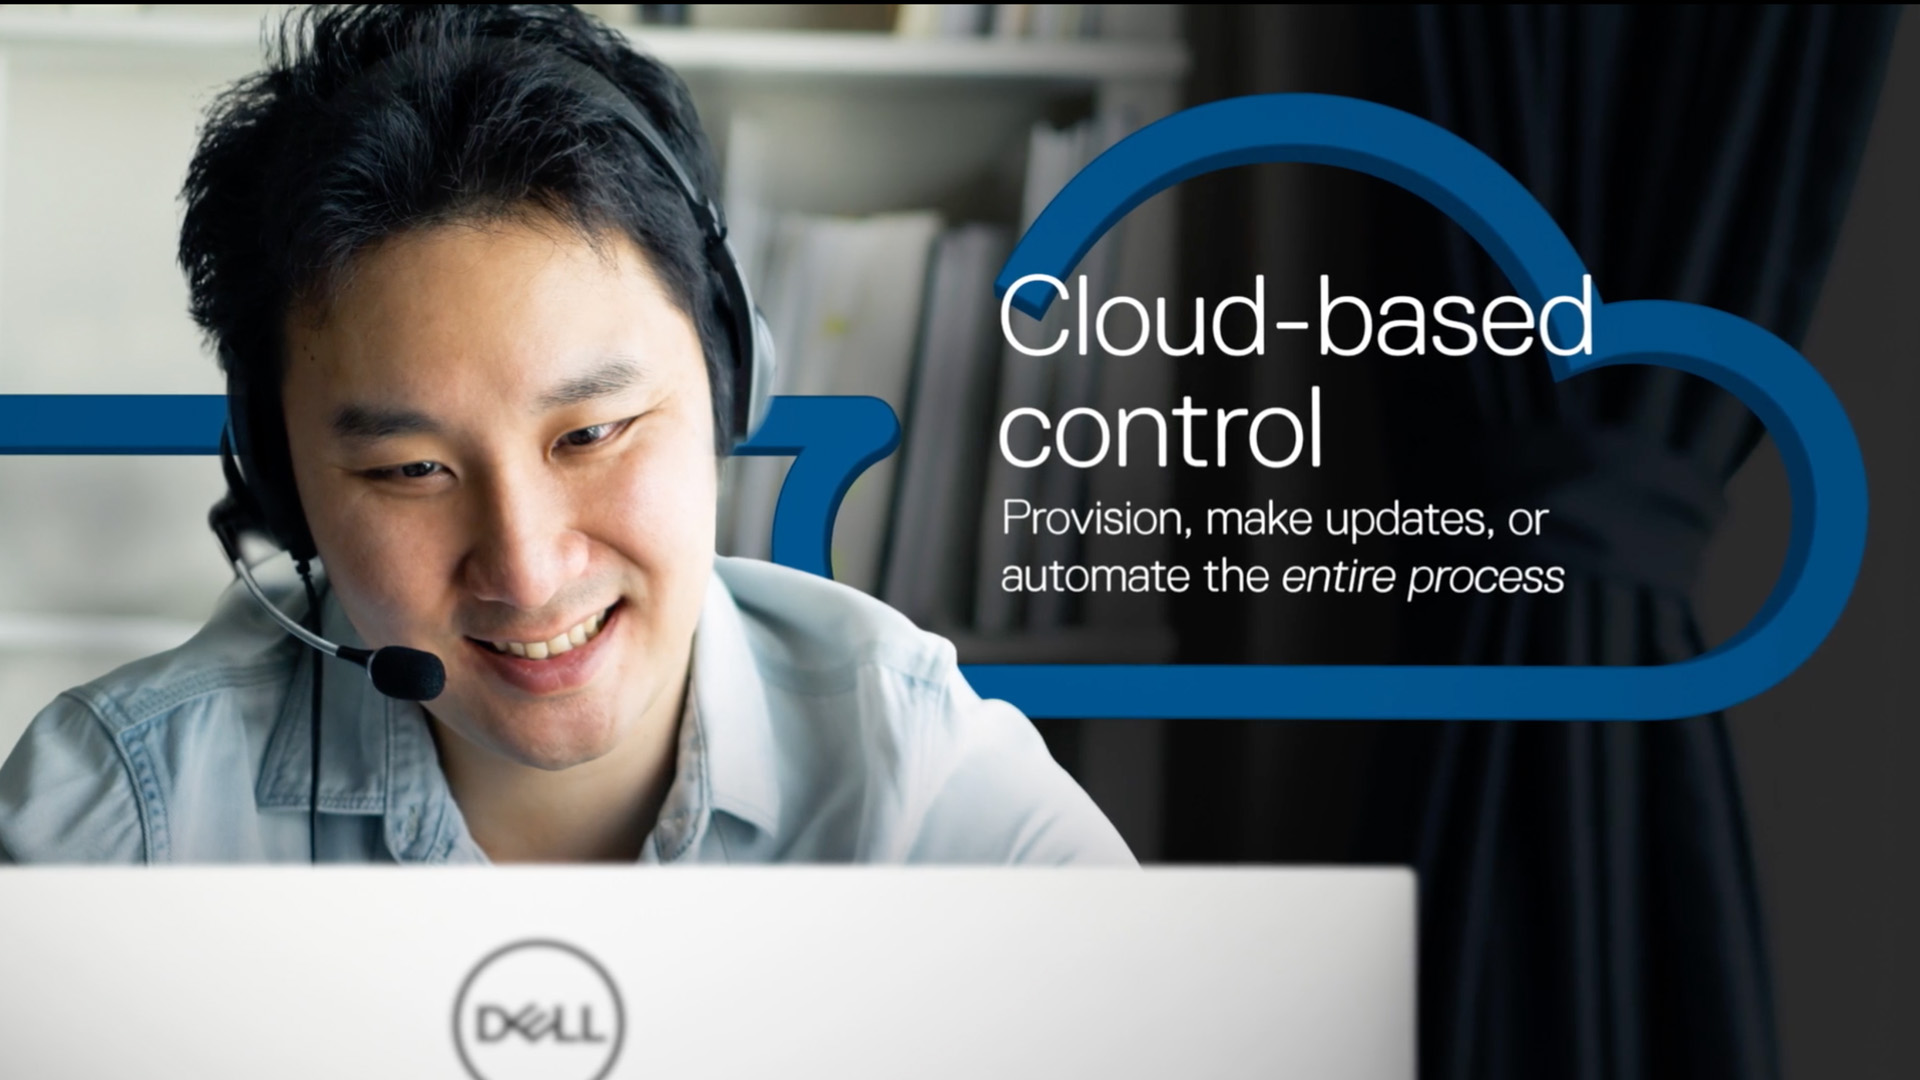 Image from the video series of a man with a headset looking at a Dell laptop screen with the text: Cloud-based control floating behind him.